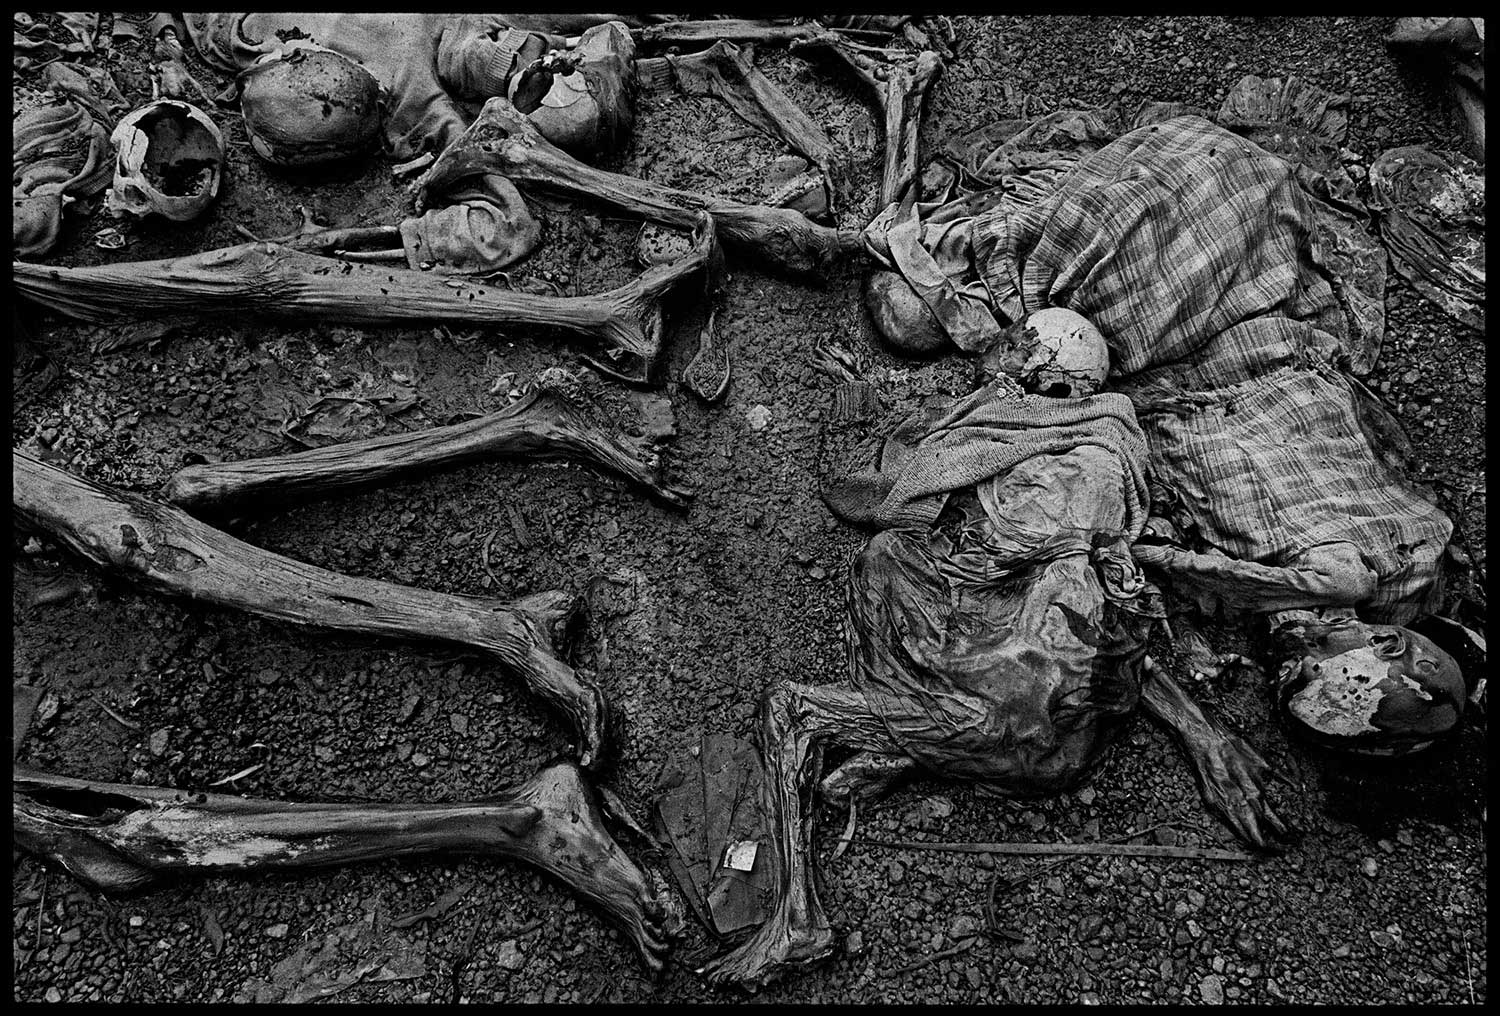 The massacre at Nyarabuye took place in the grounds of a Catholic Church and school. Hundreds of Tutsis, including many children, were slaughtered at close range, Rwanda, 1994.